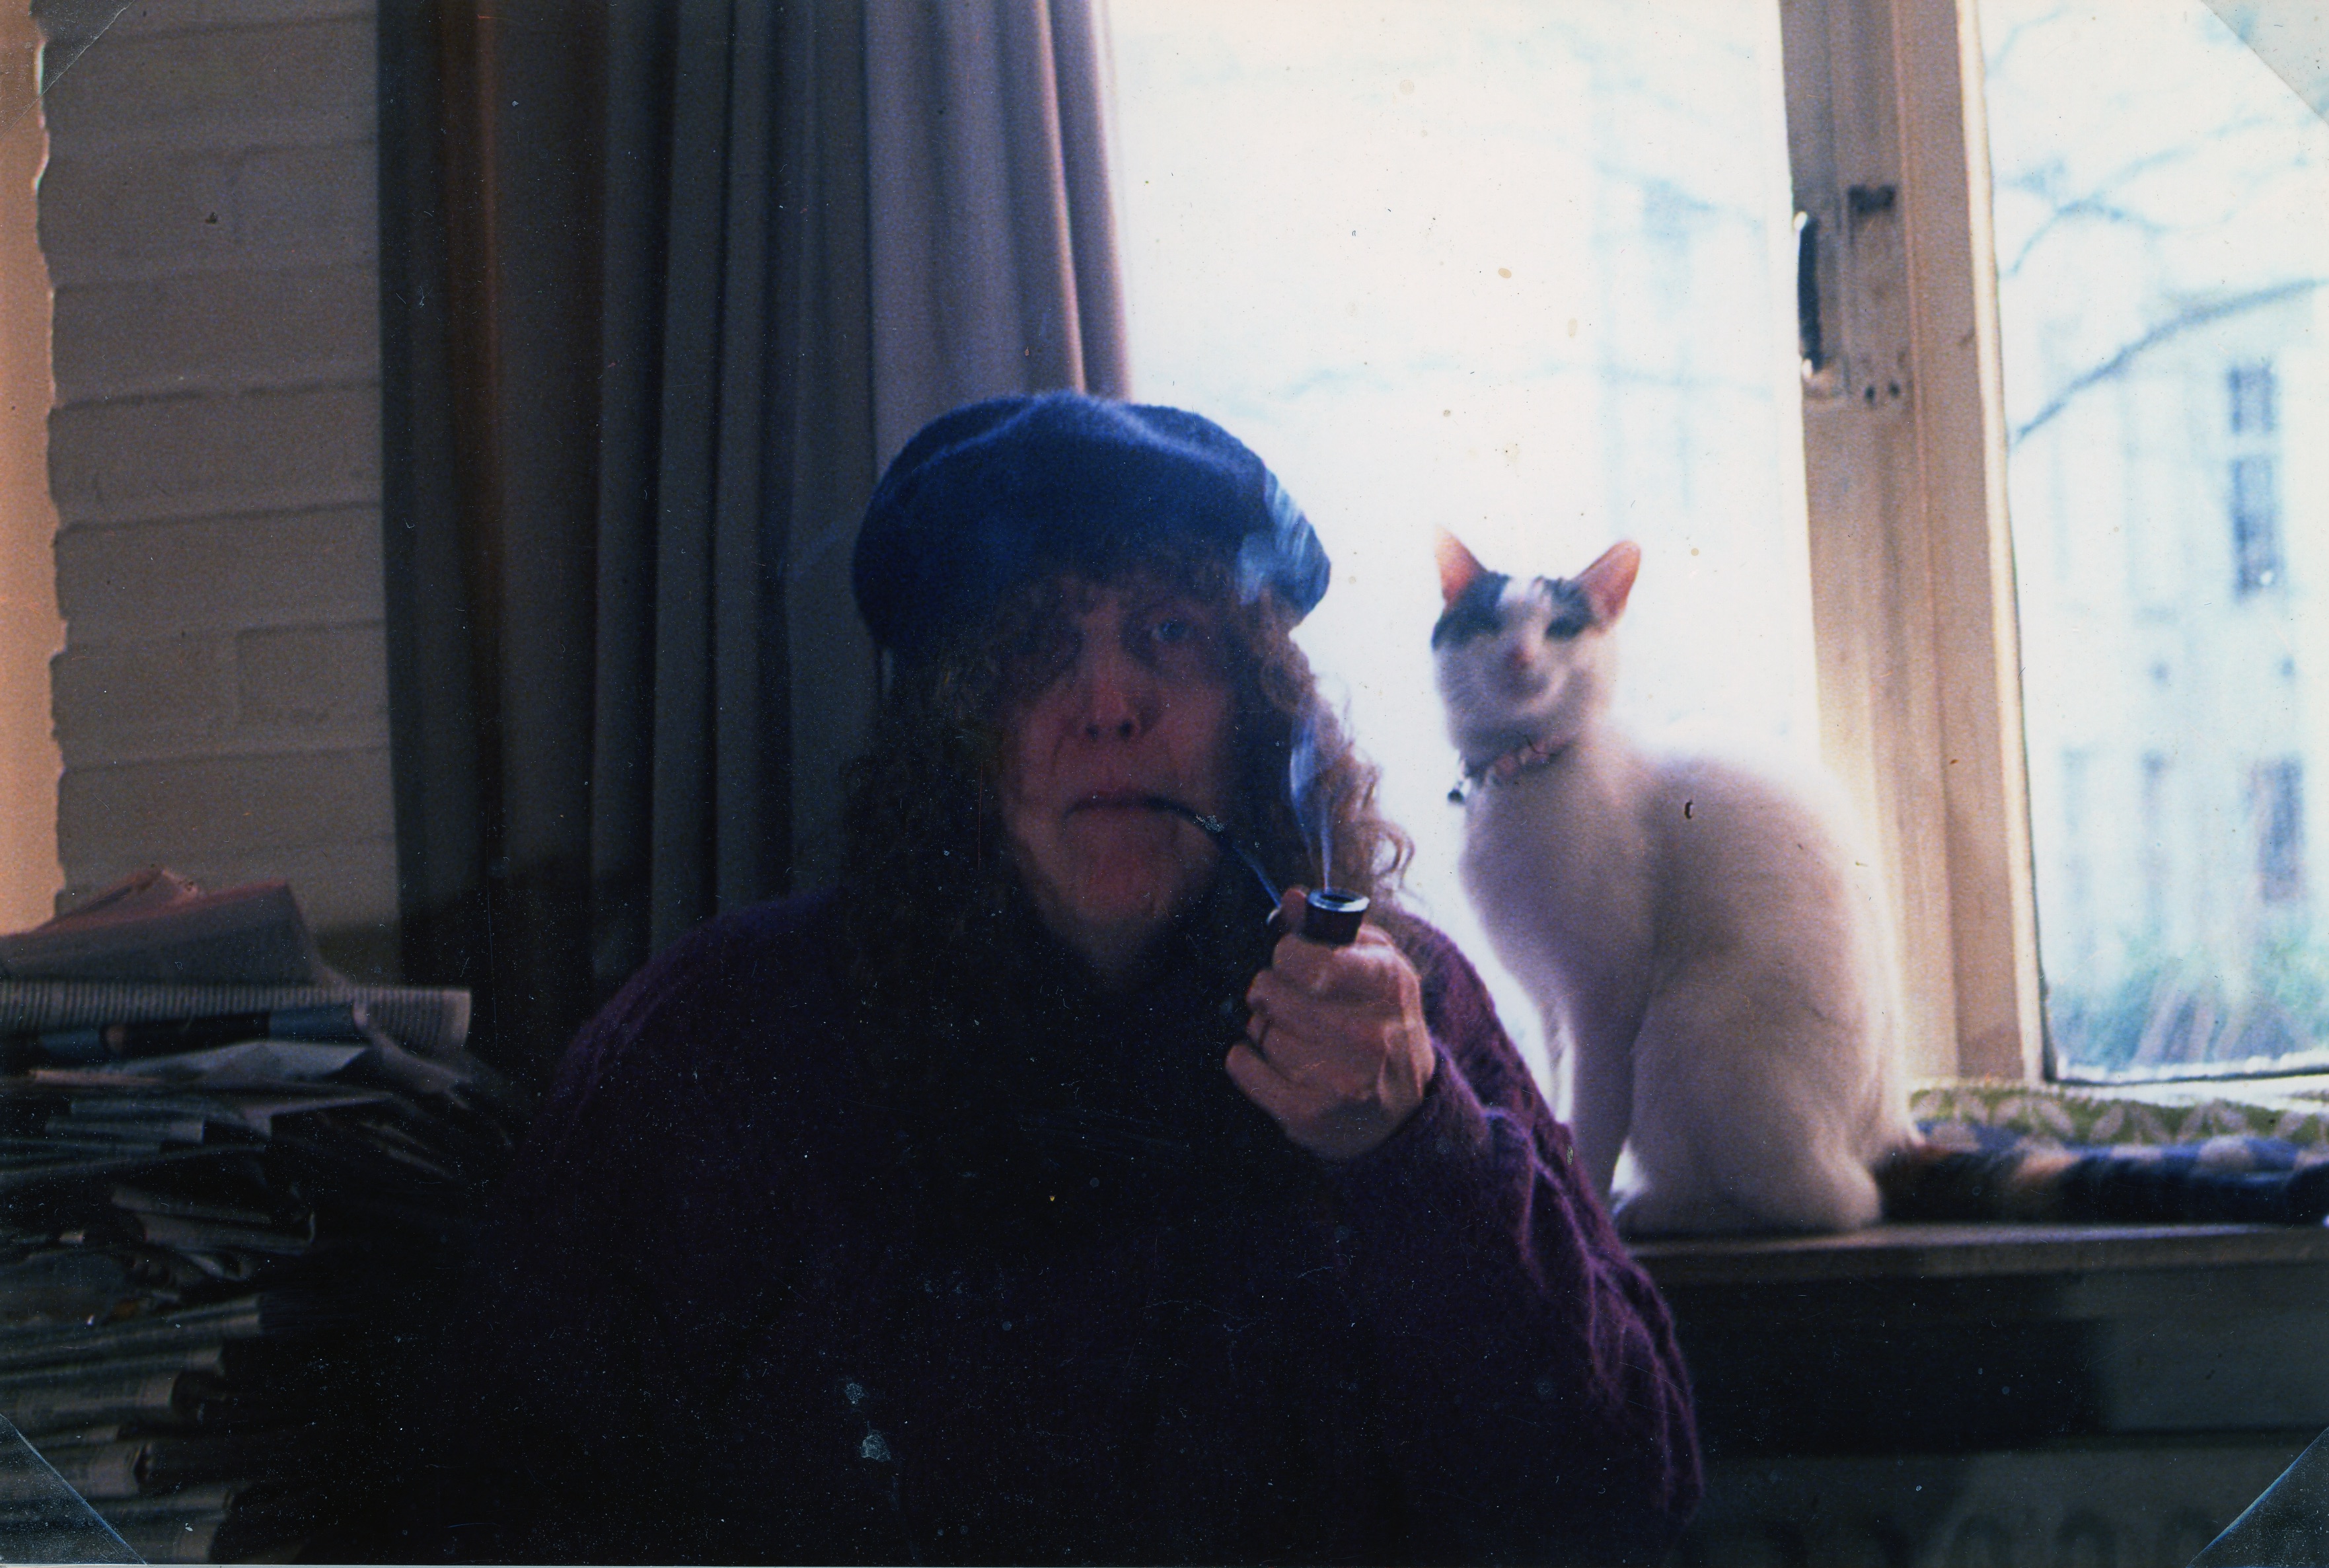 A woman (Hennix) smokes a pipe and sits in front of a cat and a curtain.